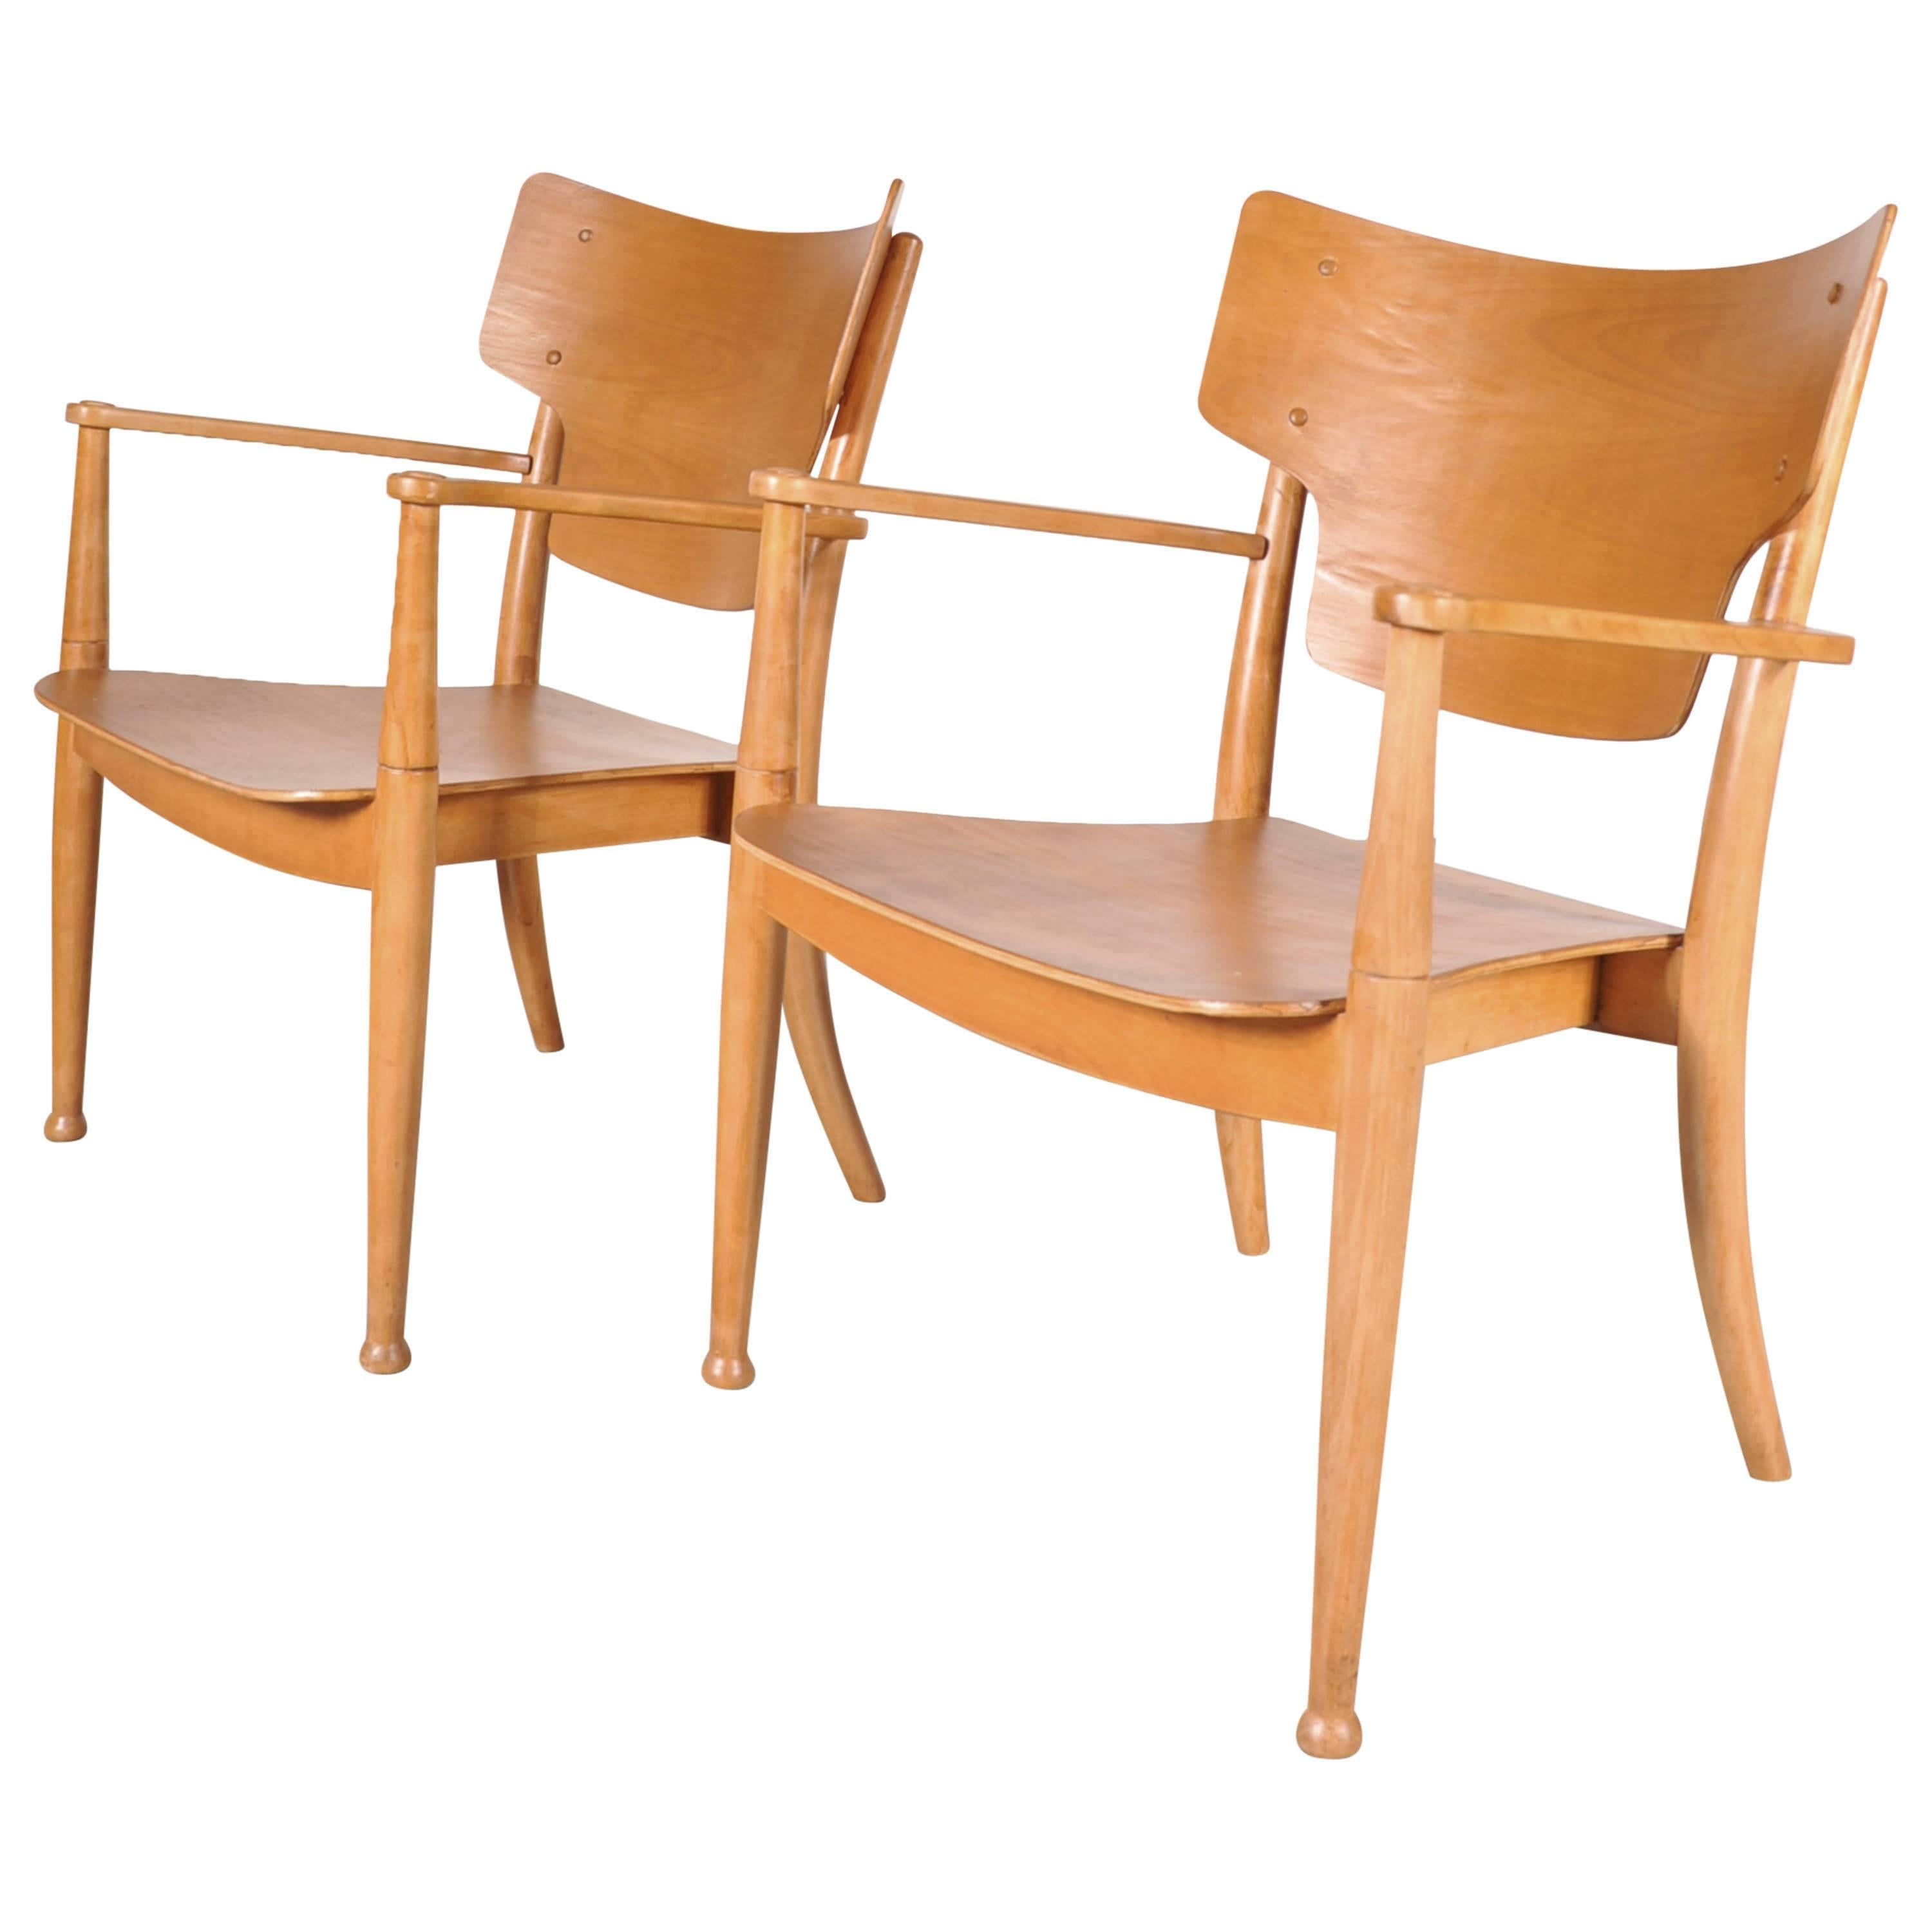 2 Portex Easy Chairs by Peter Hvidt and Orla Molgaard-Nielsen, circa 1940